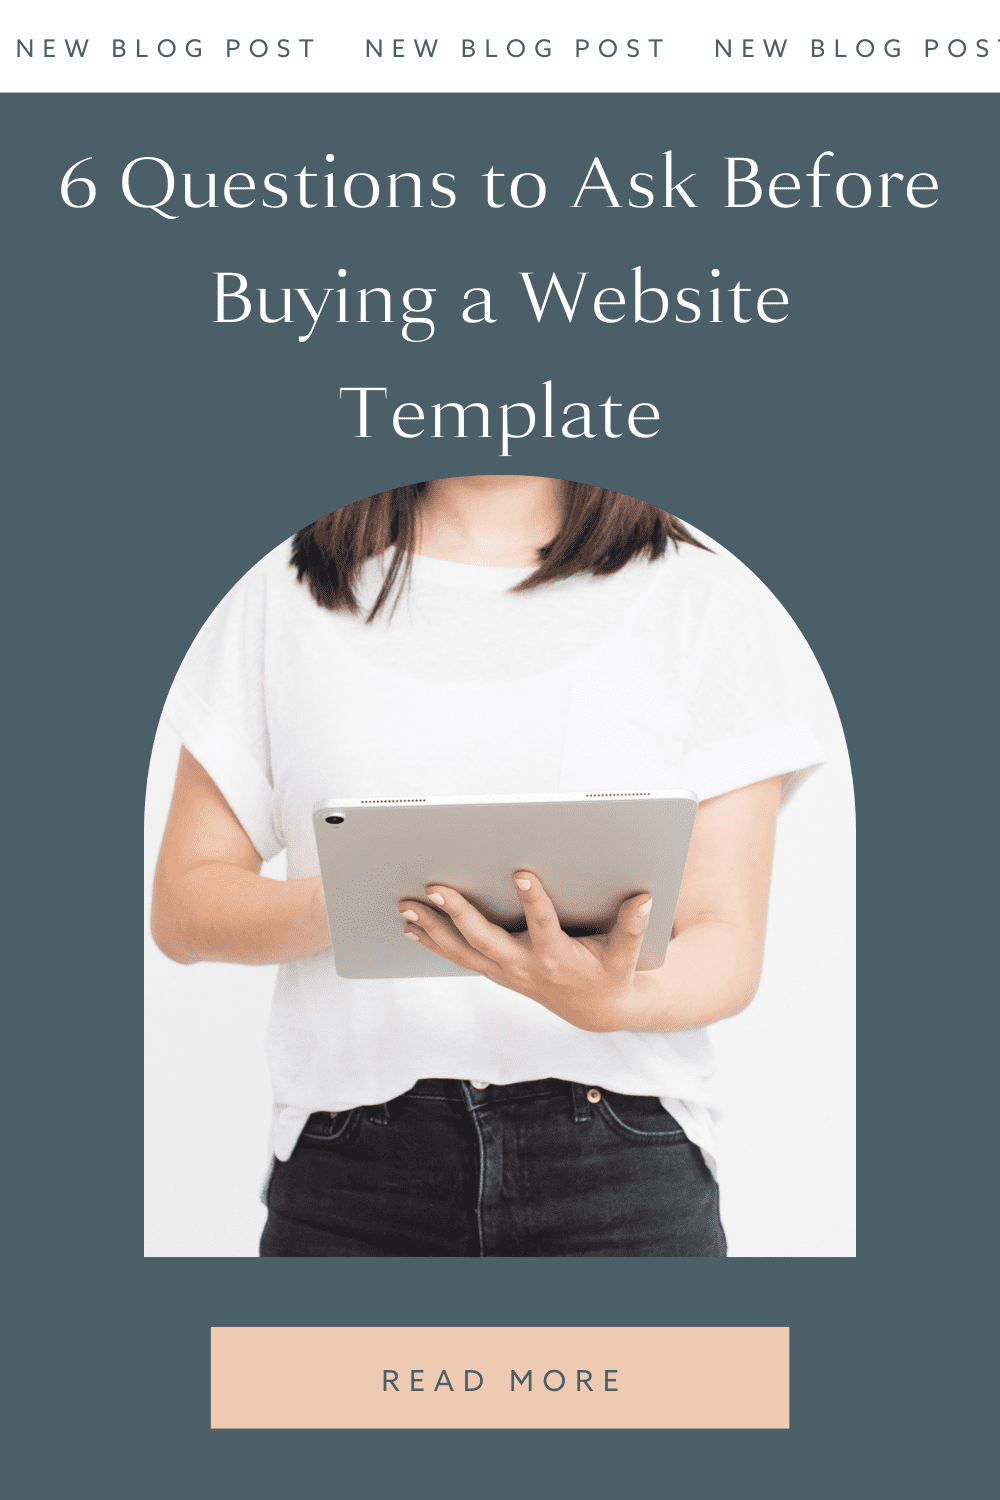 6 Questions to Ask Before Buying a Website Template